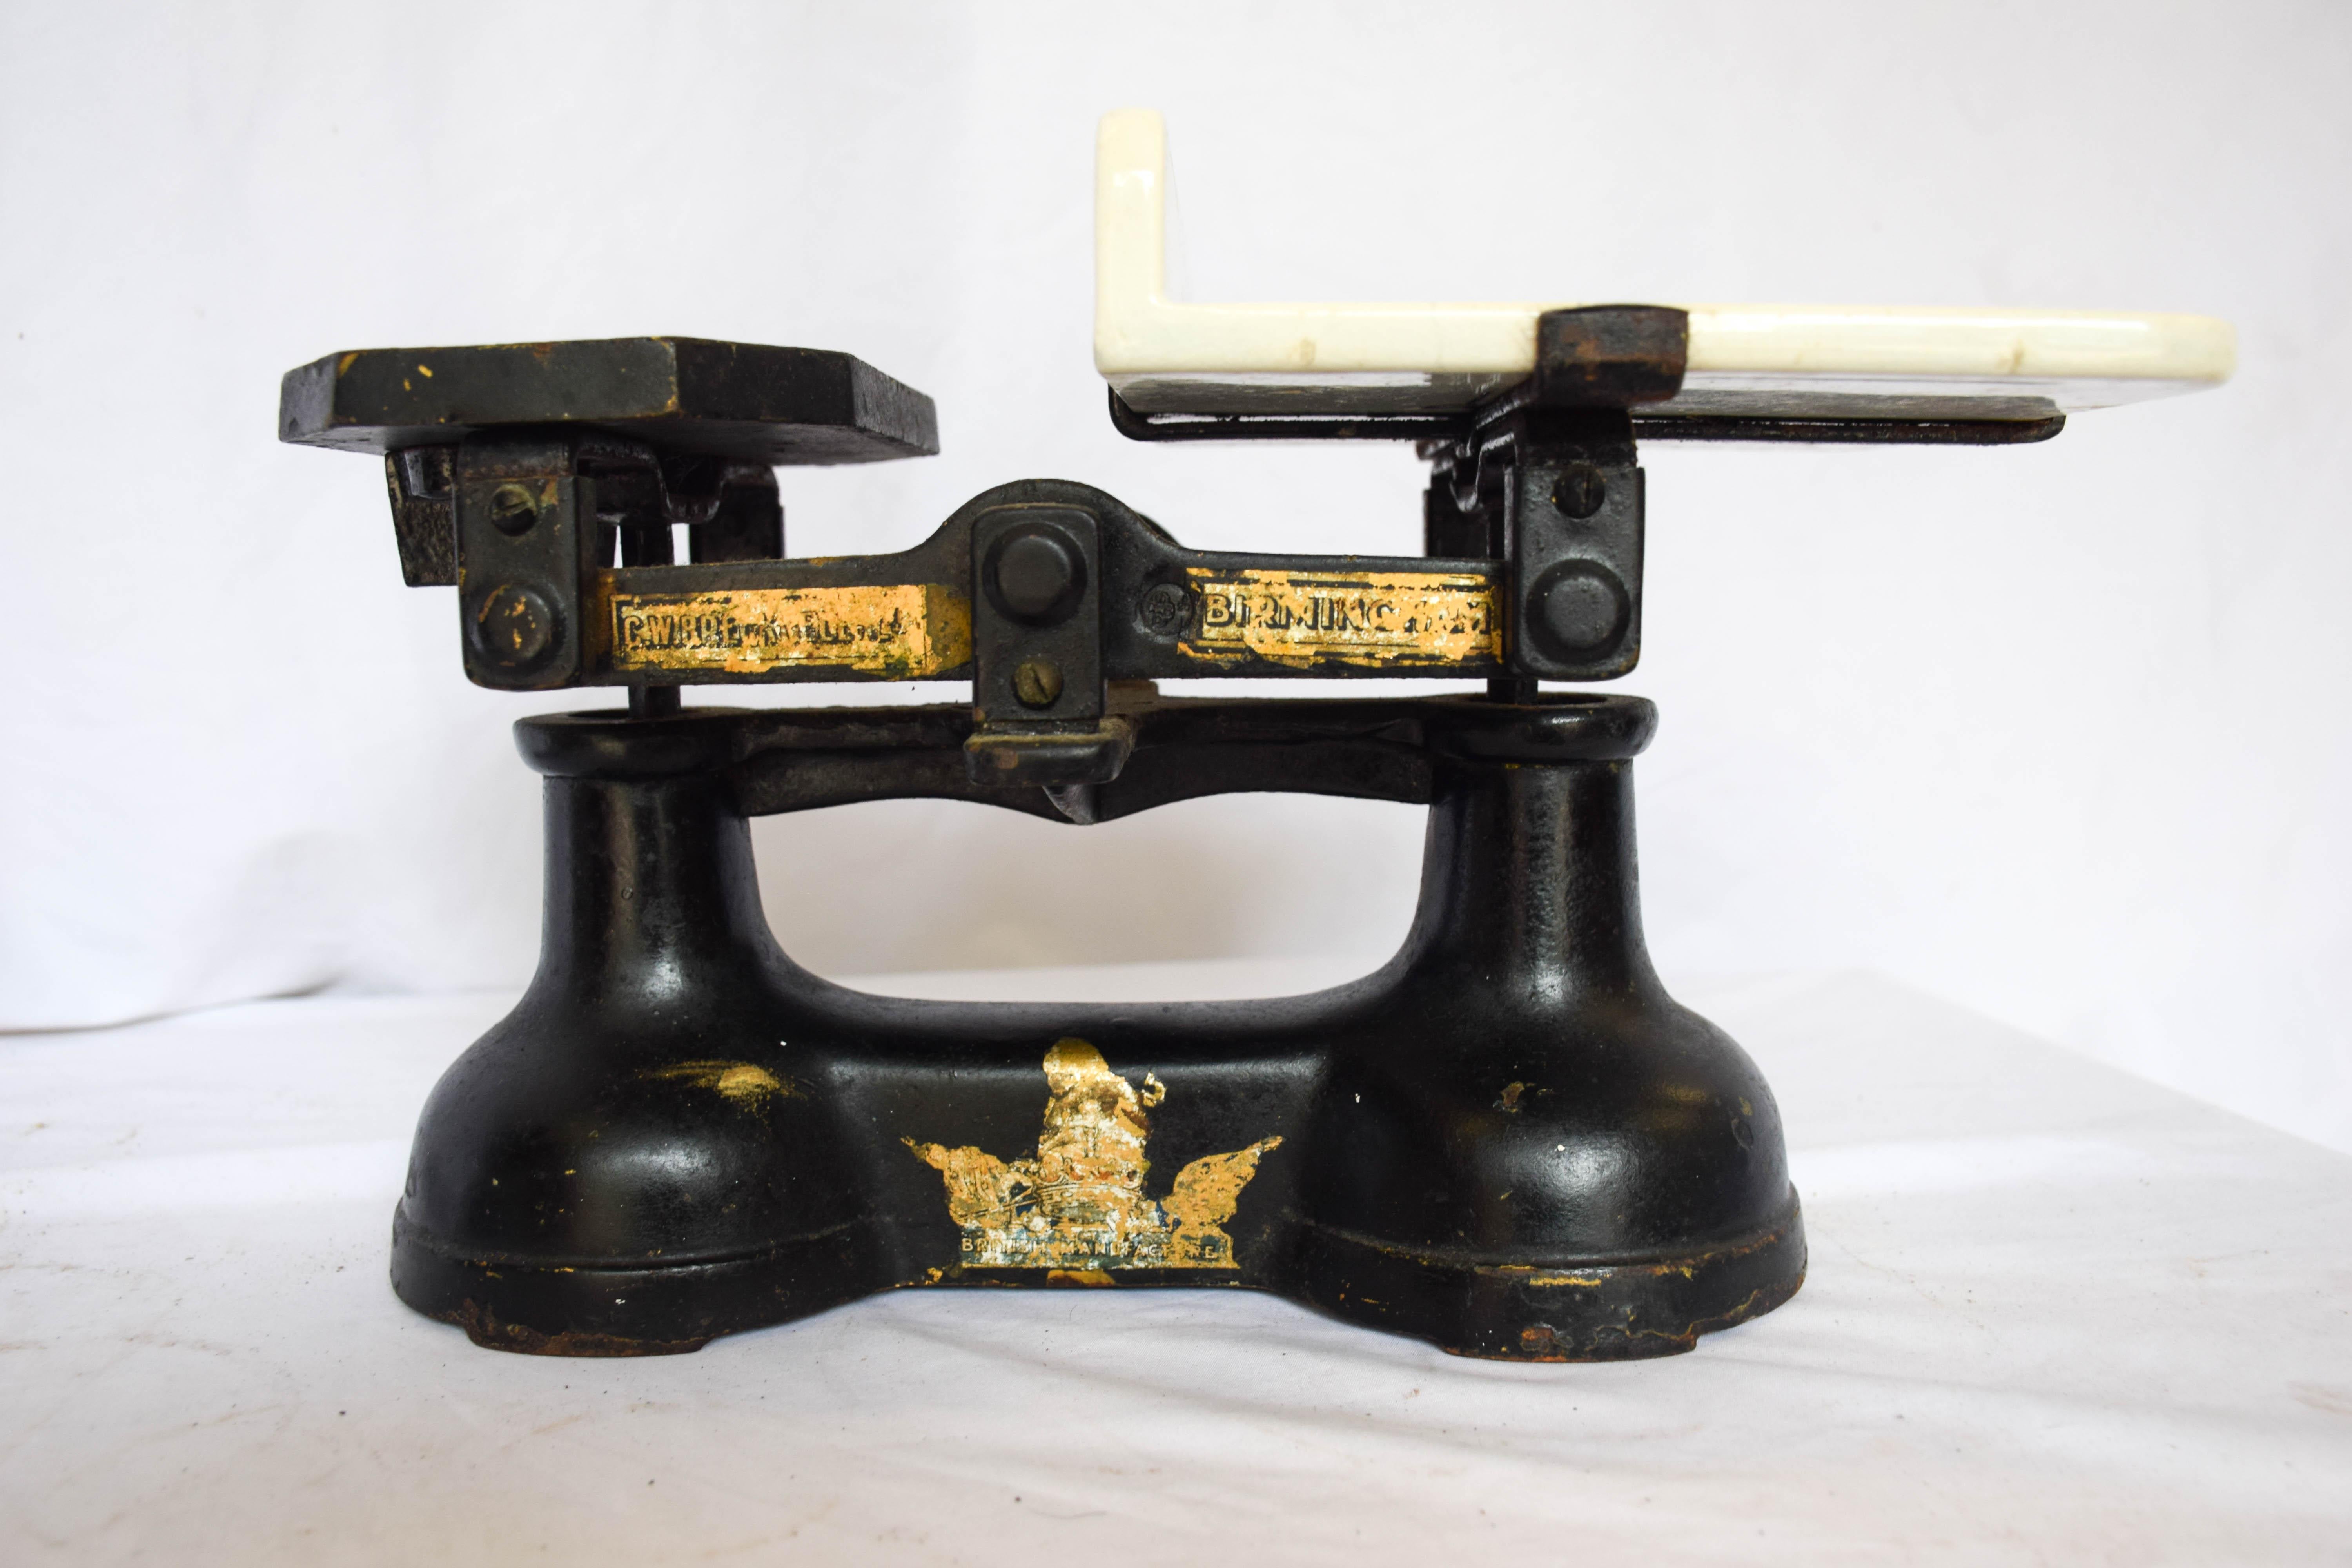 Wonderful English Countertop scale in black cast iron from the C.W. Becknell scale company in Birmingham England. This functioning kitchen scale with weights has a beautiful milk ironstone embossed with Justitia Virtutum Regina which means the Queen